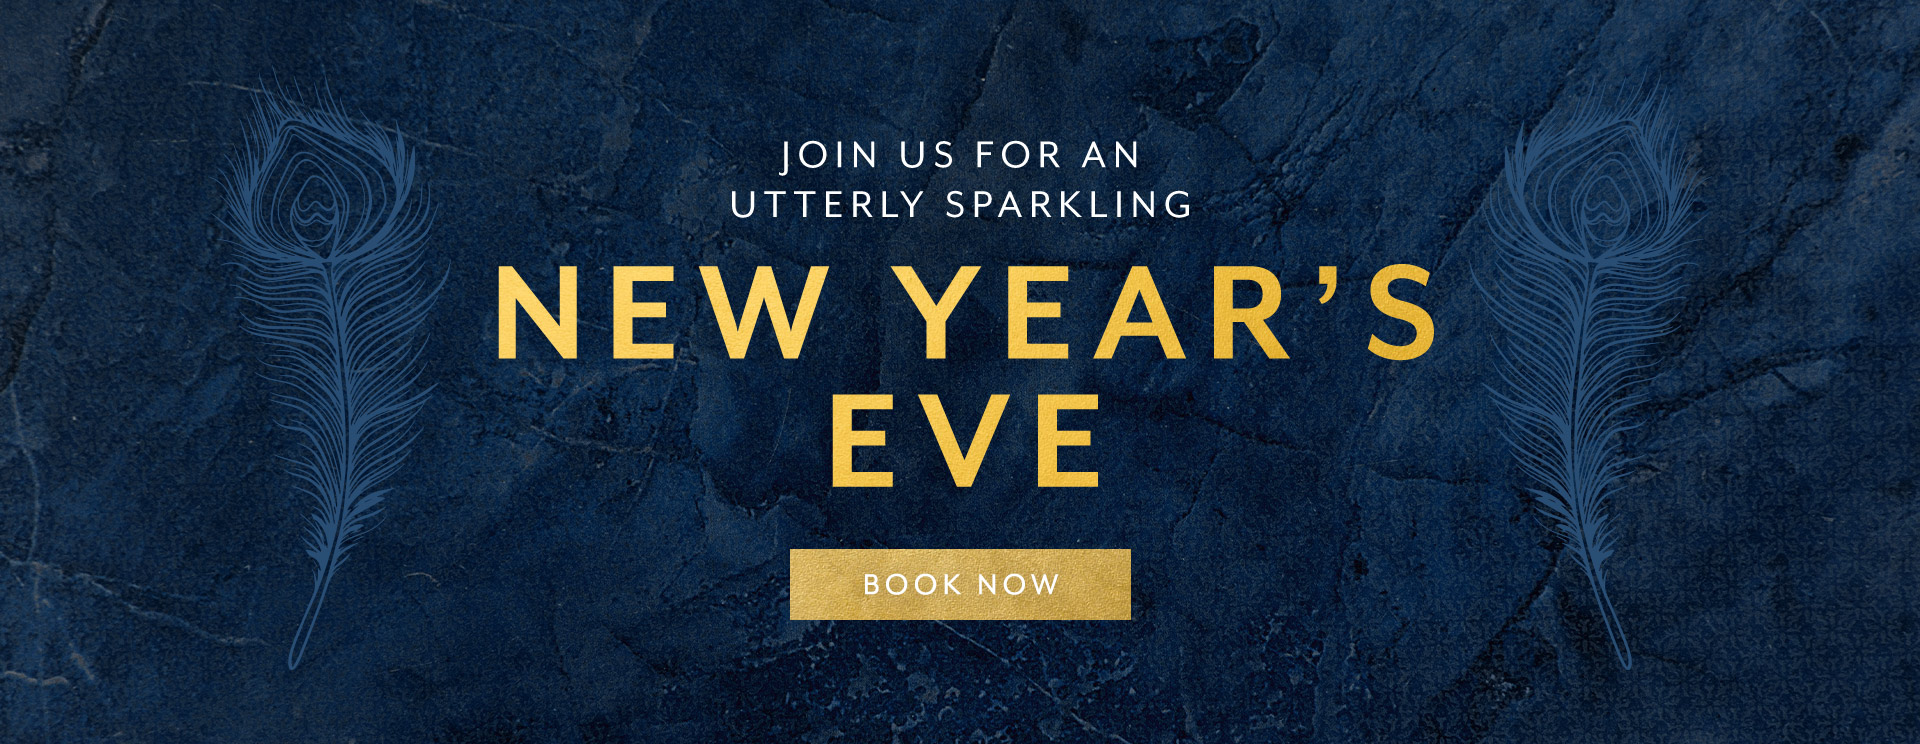 New Year's Eve at The Botanist Bristol